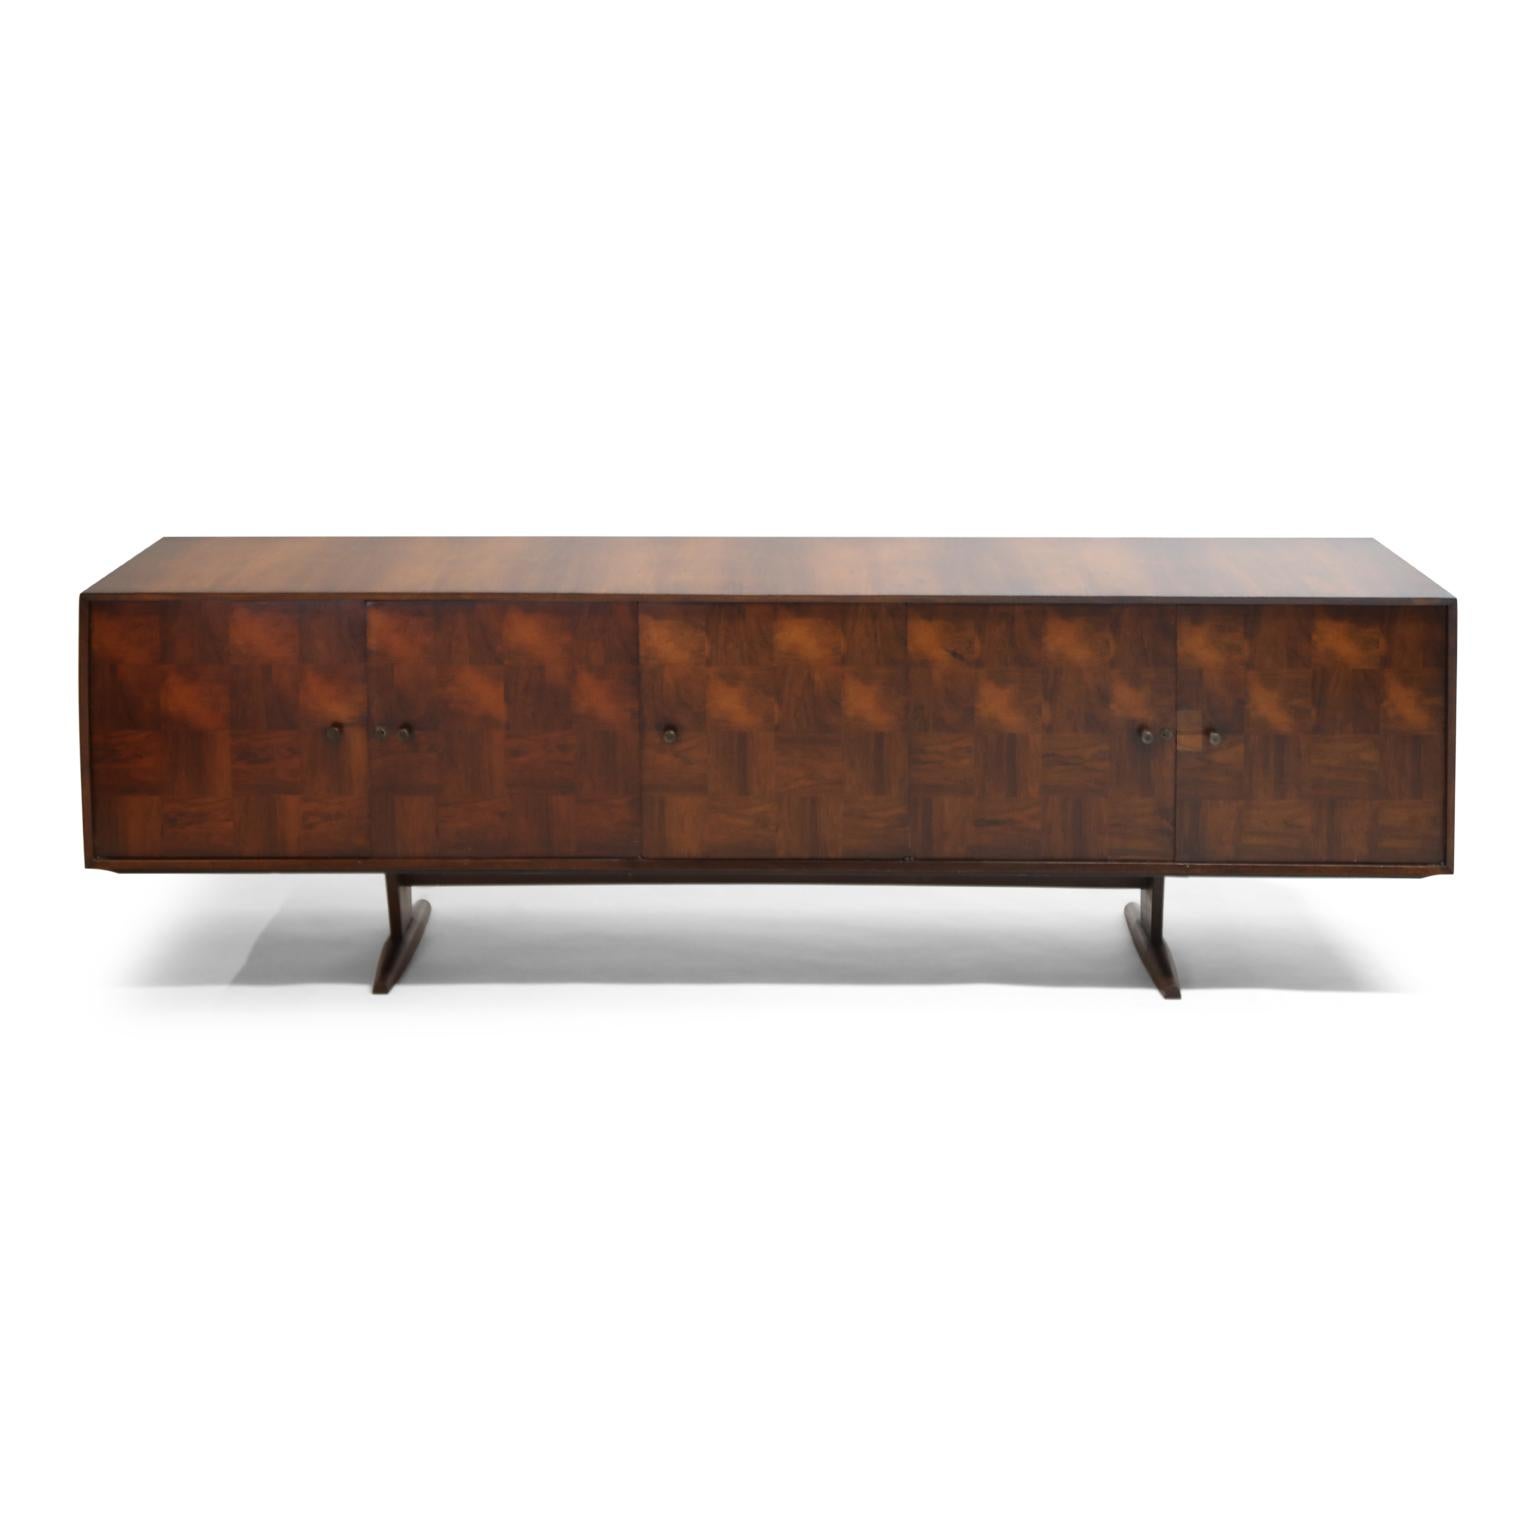 Such a fine piece of Brazilian modern artistry, this Brazilian credenza by Scapinelli was designed and produced in the 1960s, only a very limited number of these were made so its no wonder that these are sought after by top collectors and dealers.